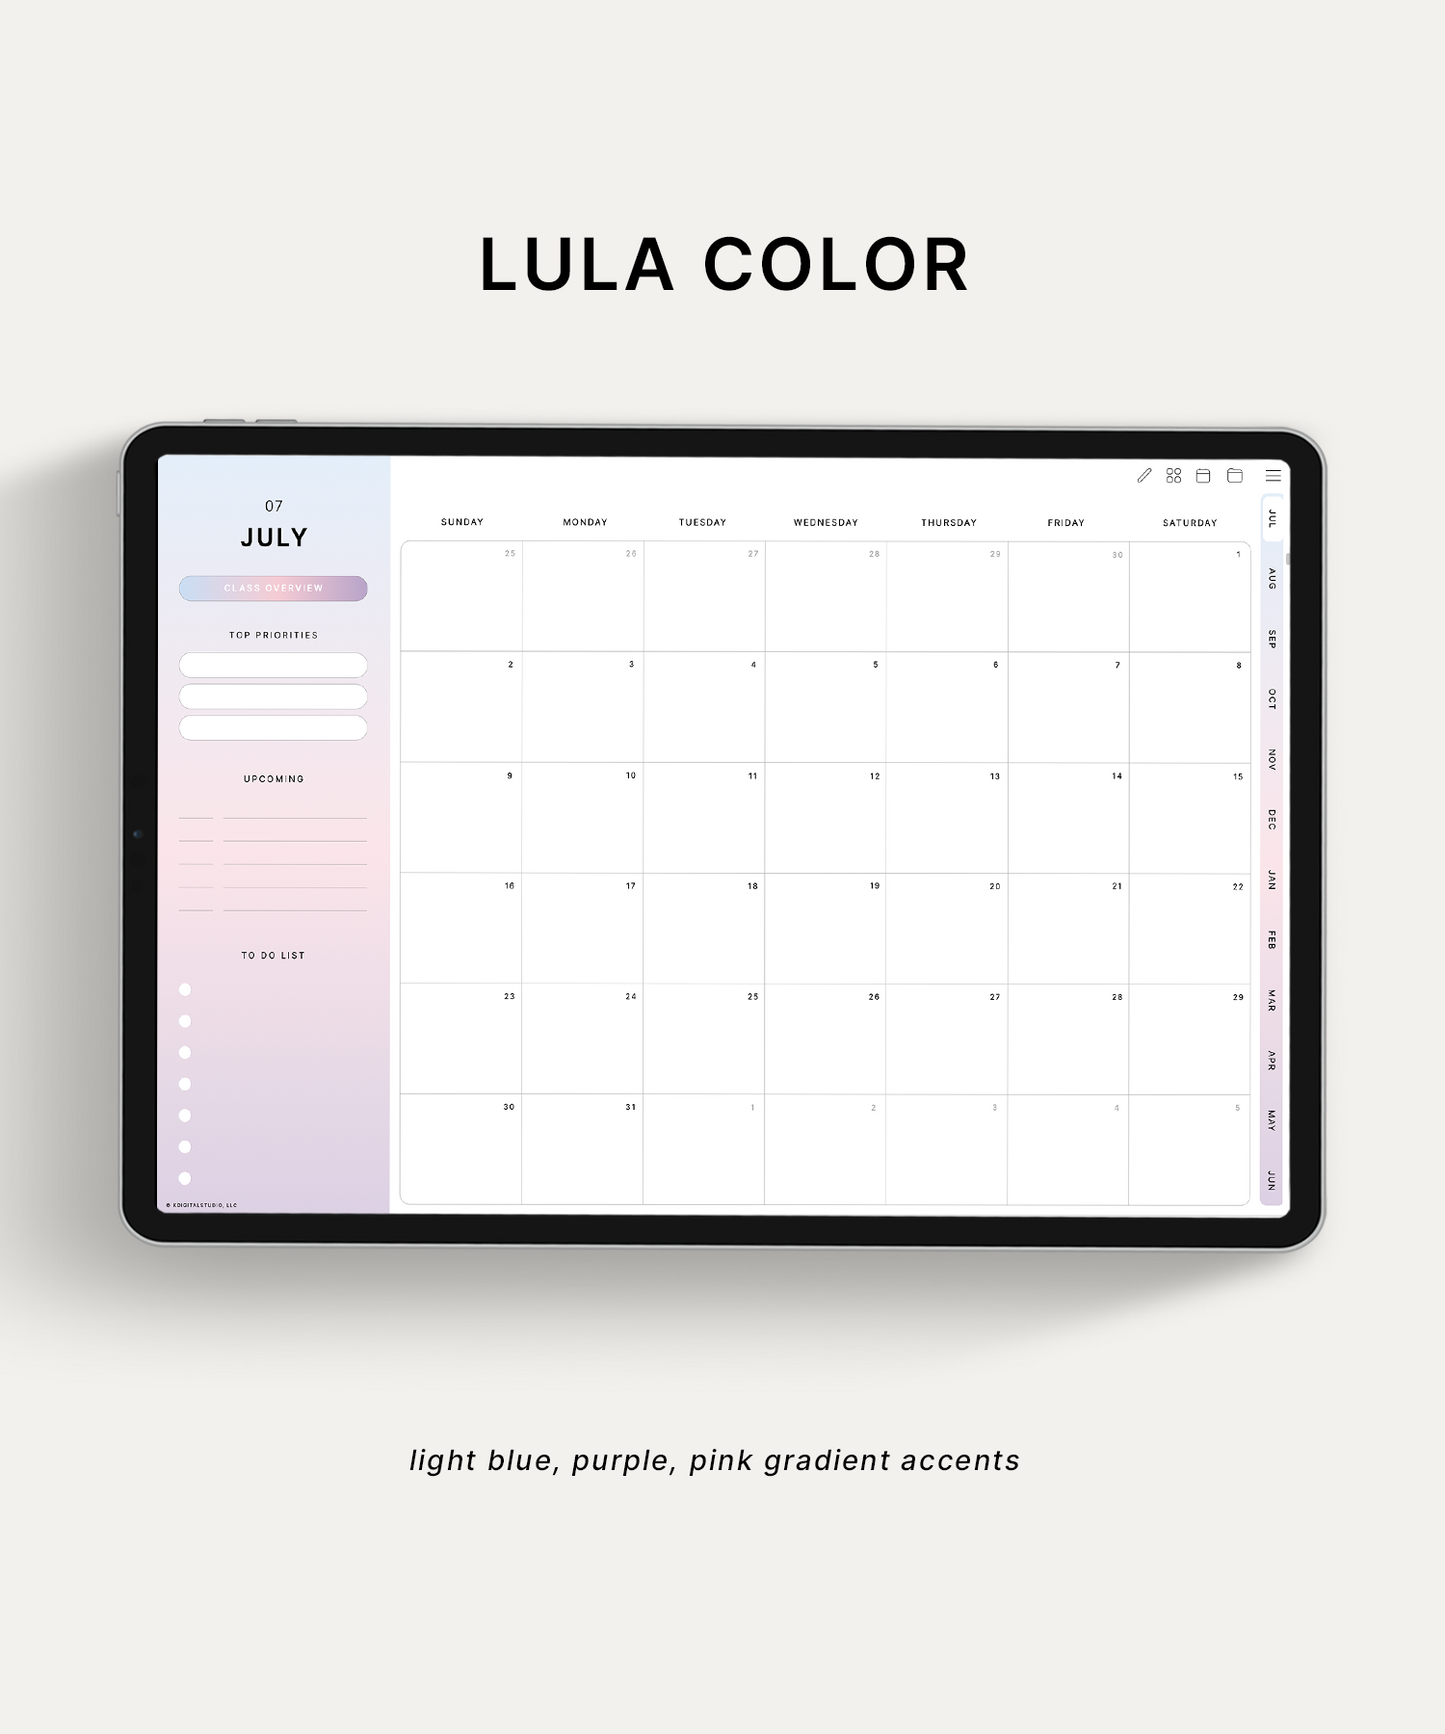 Lula color of the academic student digital planner